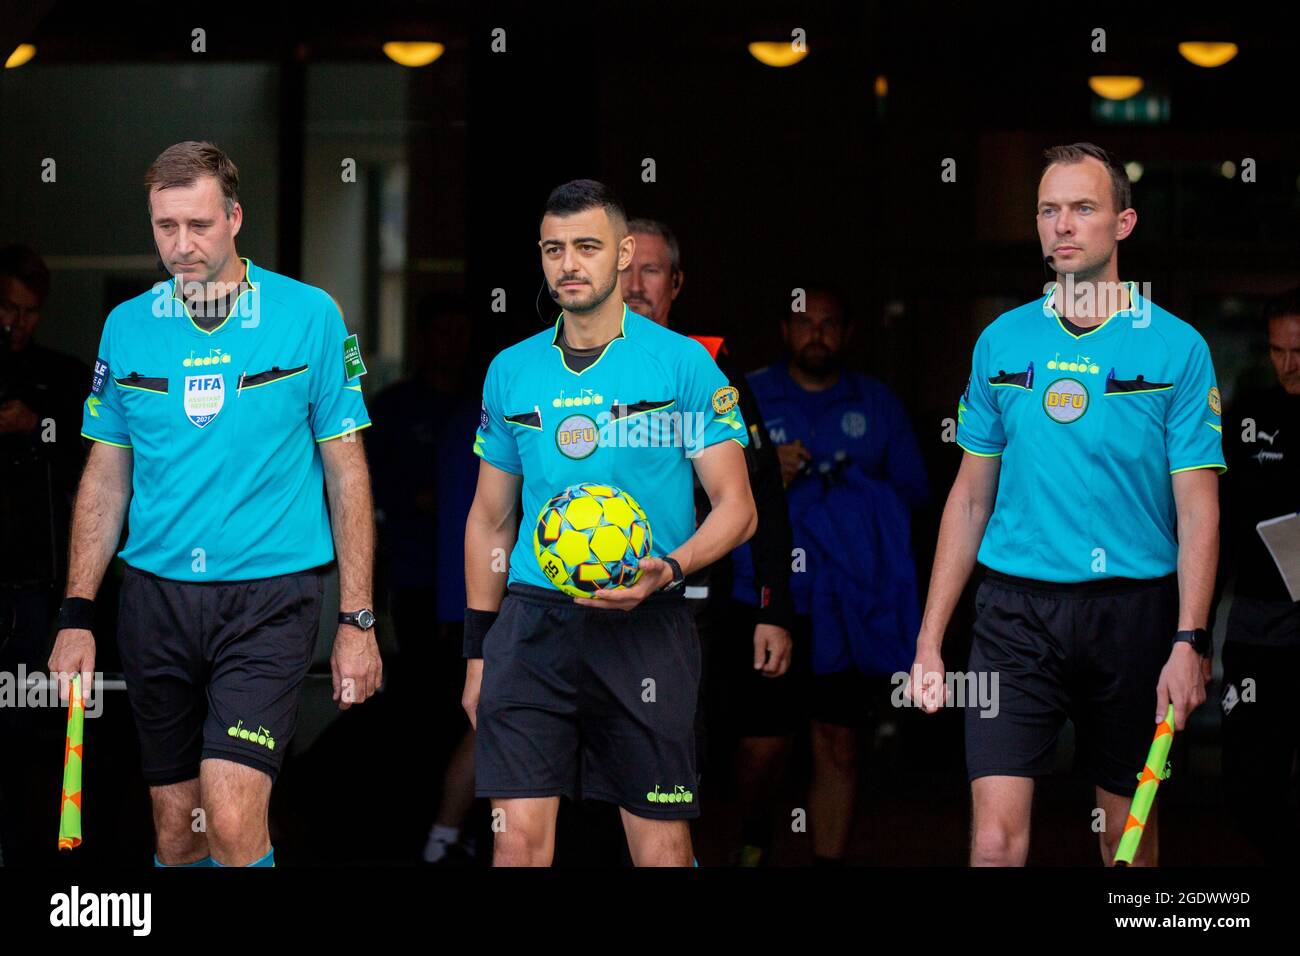 Viborg, Denmark. 13th, August 2021. Referee Aydin Uslu enters the pitch for the 3F Superliga match between Viborg FF and Randers FC at Energy Viborg Arena in Viborg. (Photo credit: Gonzales Photo - Balazs Popal). Stock Photo